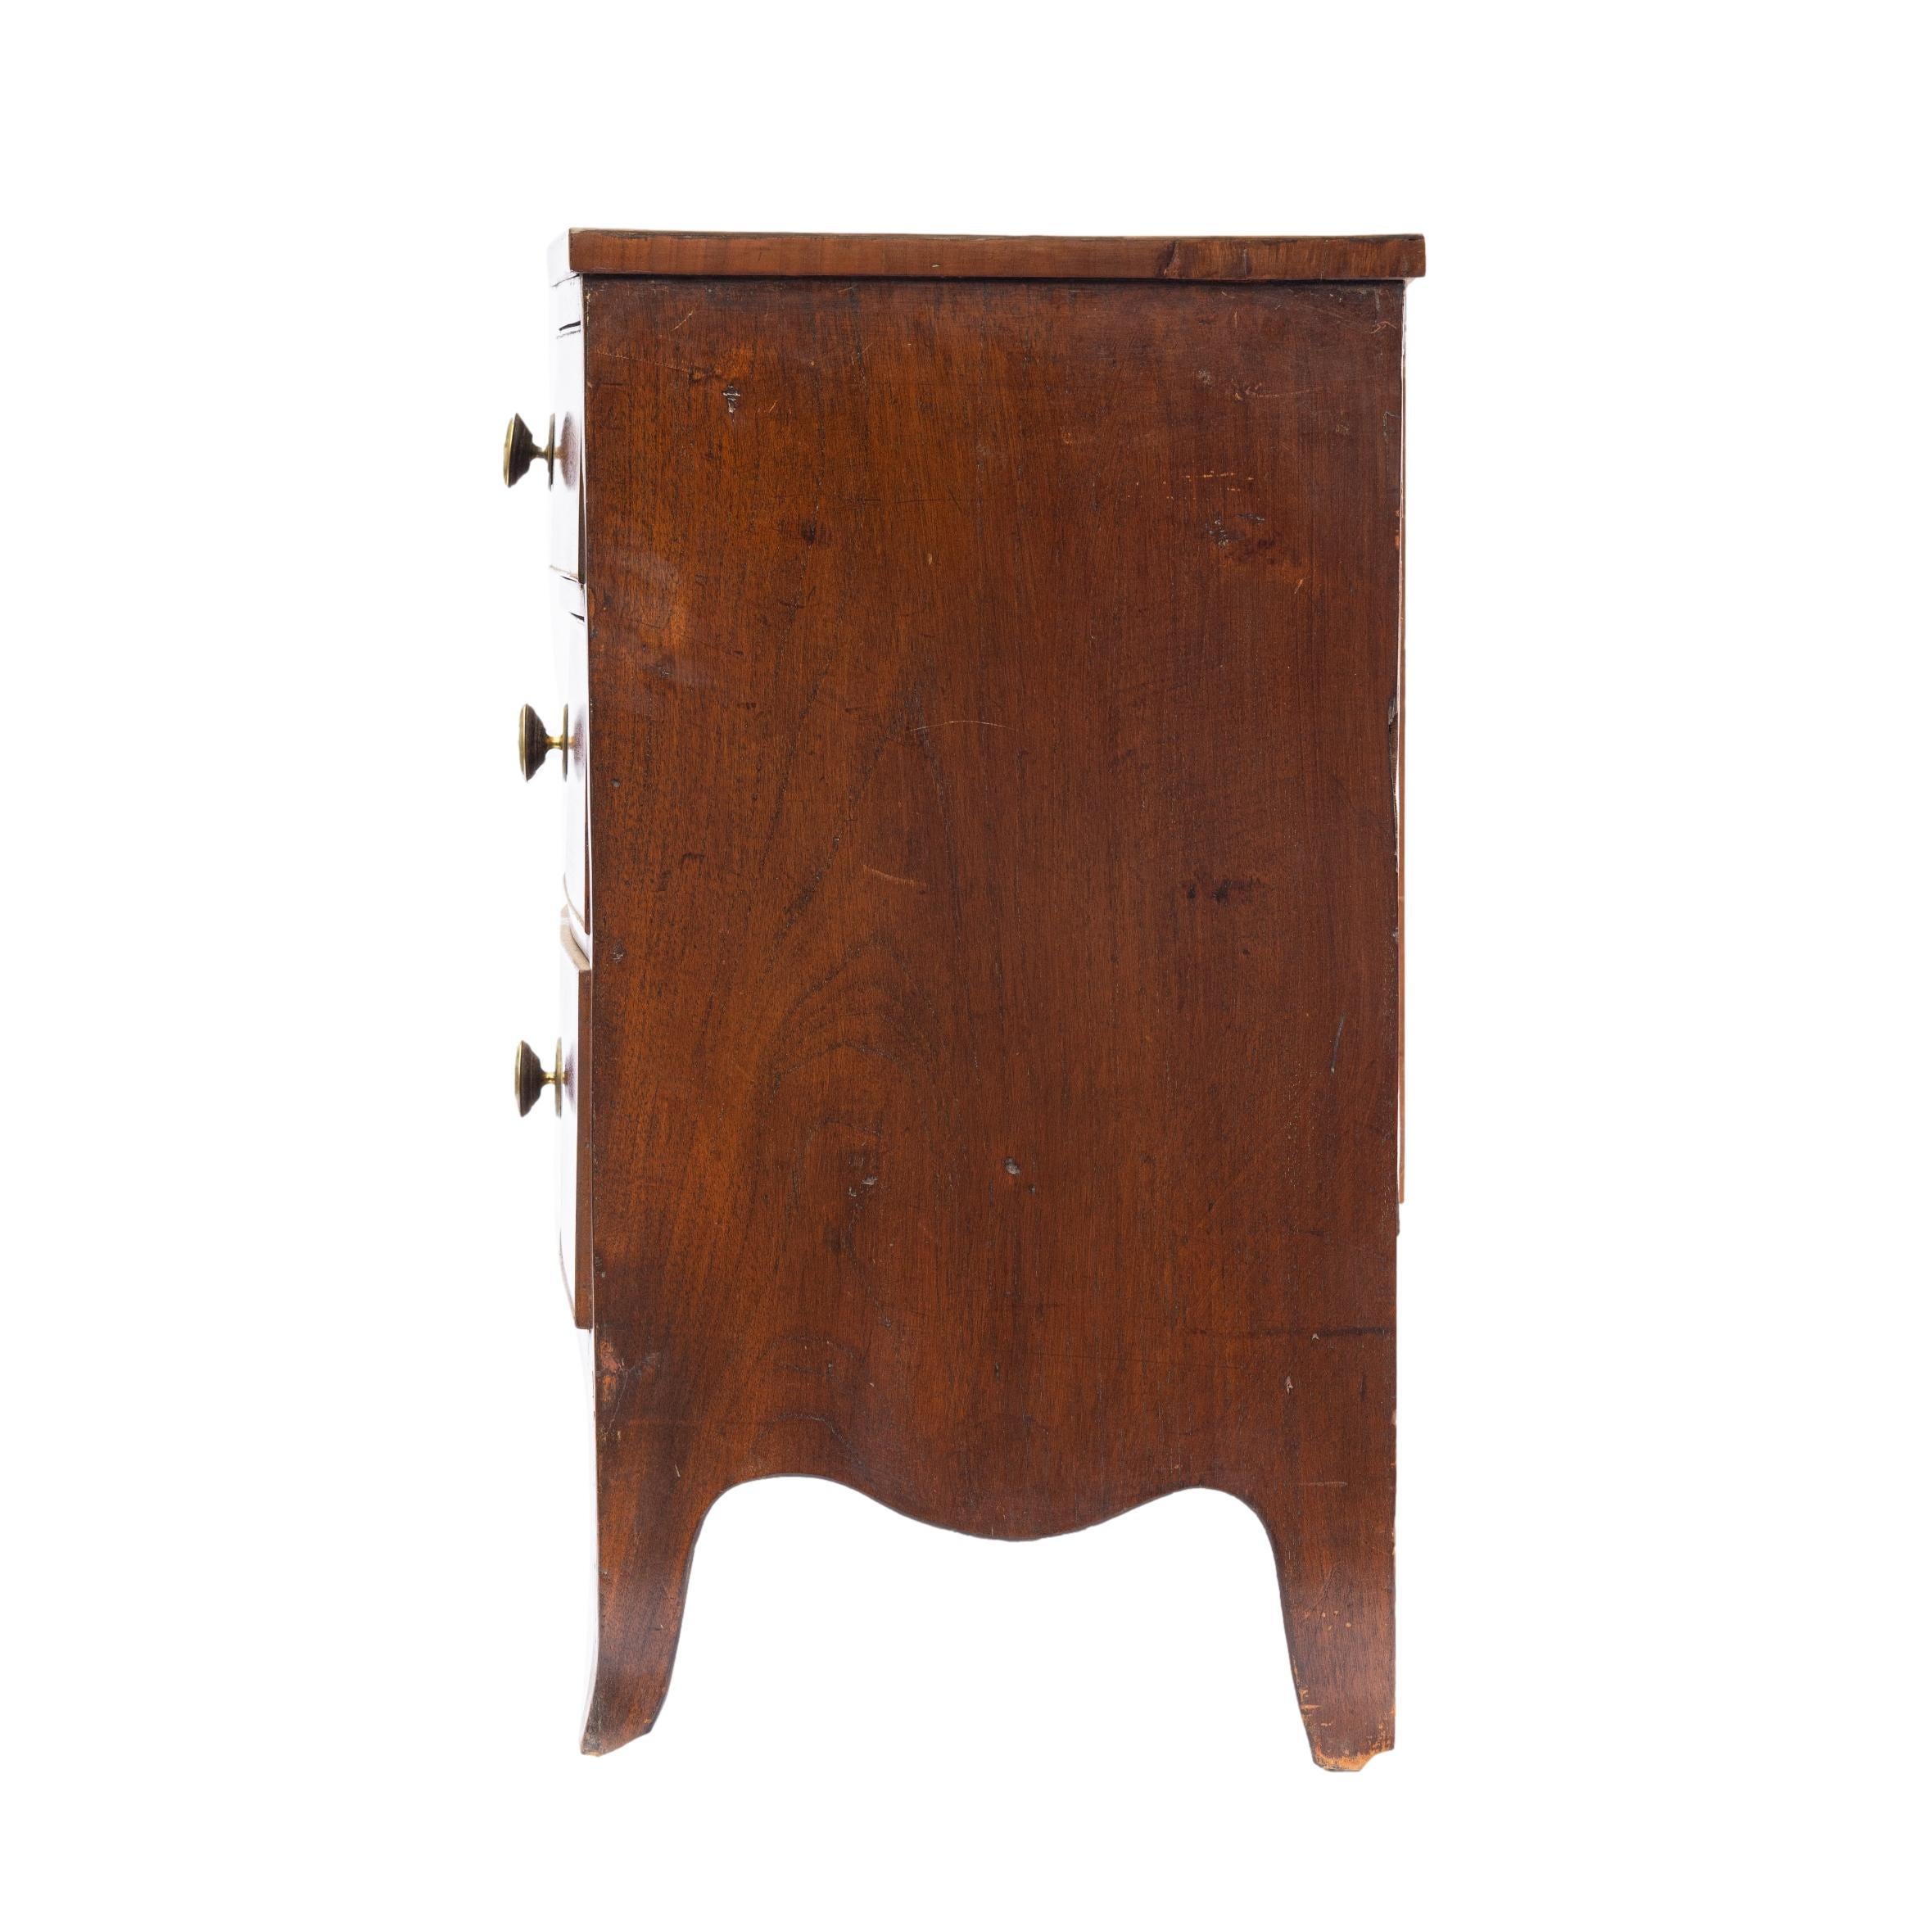 Hand-Crafted Georgian Mahogany Bow-Front Chest of Drawers with Satinwood Inlay, ca. 1820